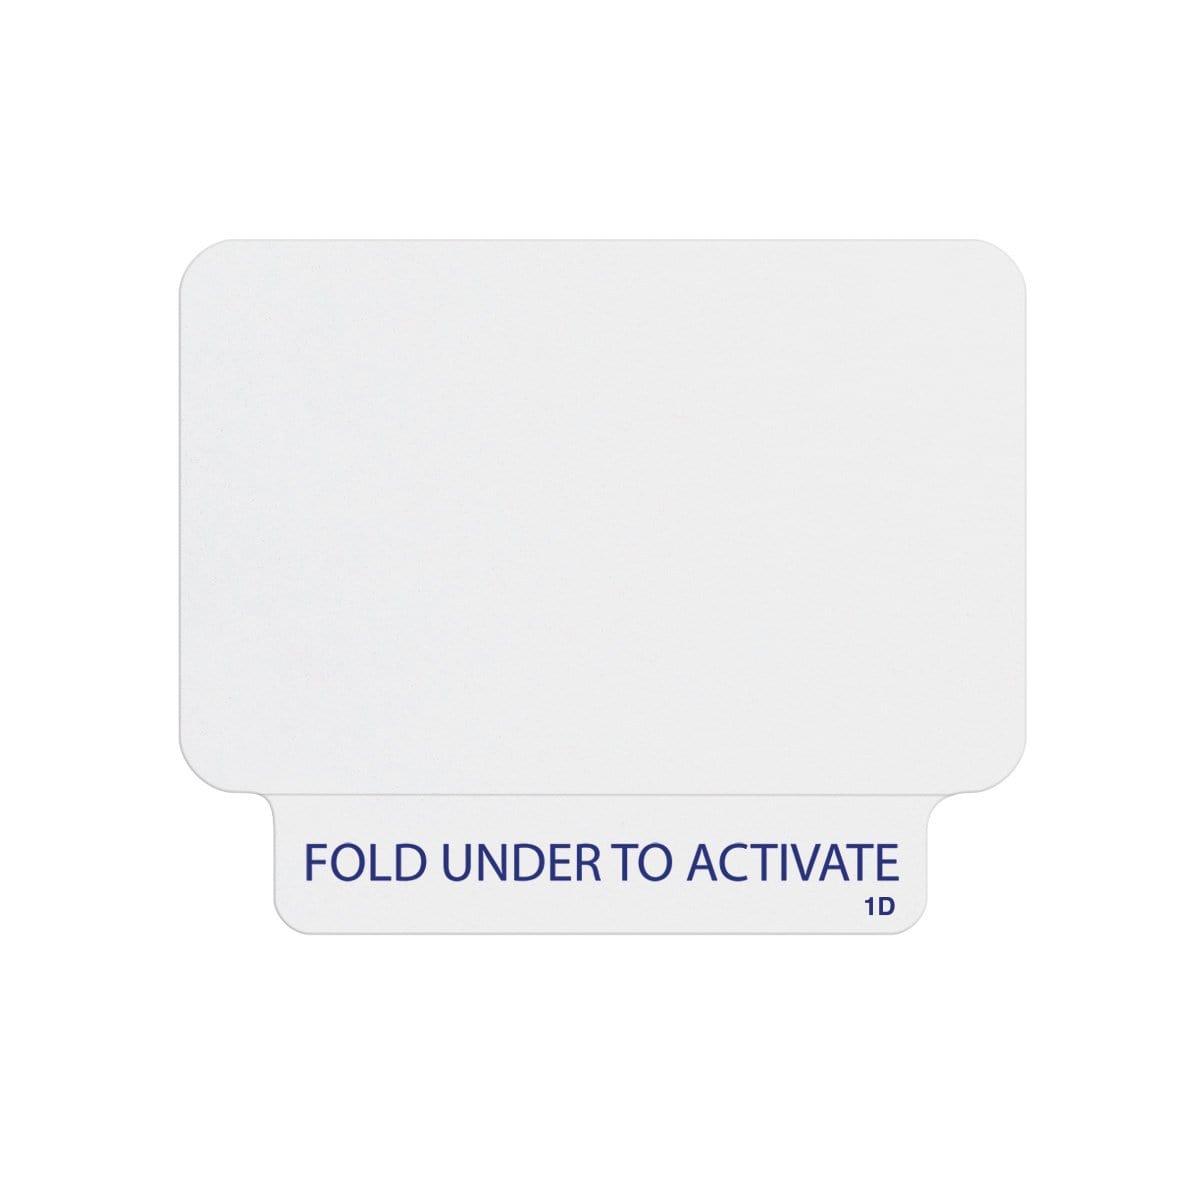 1+ Thermal Printable ONEstep Quick Tab TimeBadge, Box of 1000 (P/N T2031) T2031